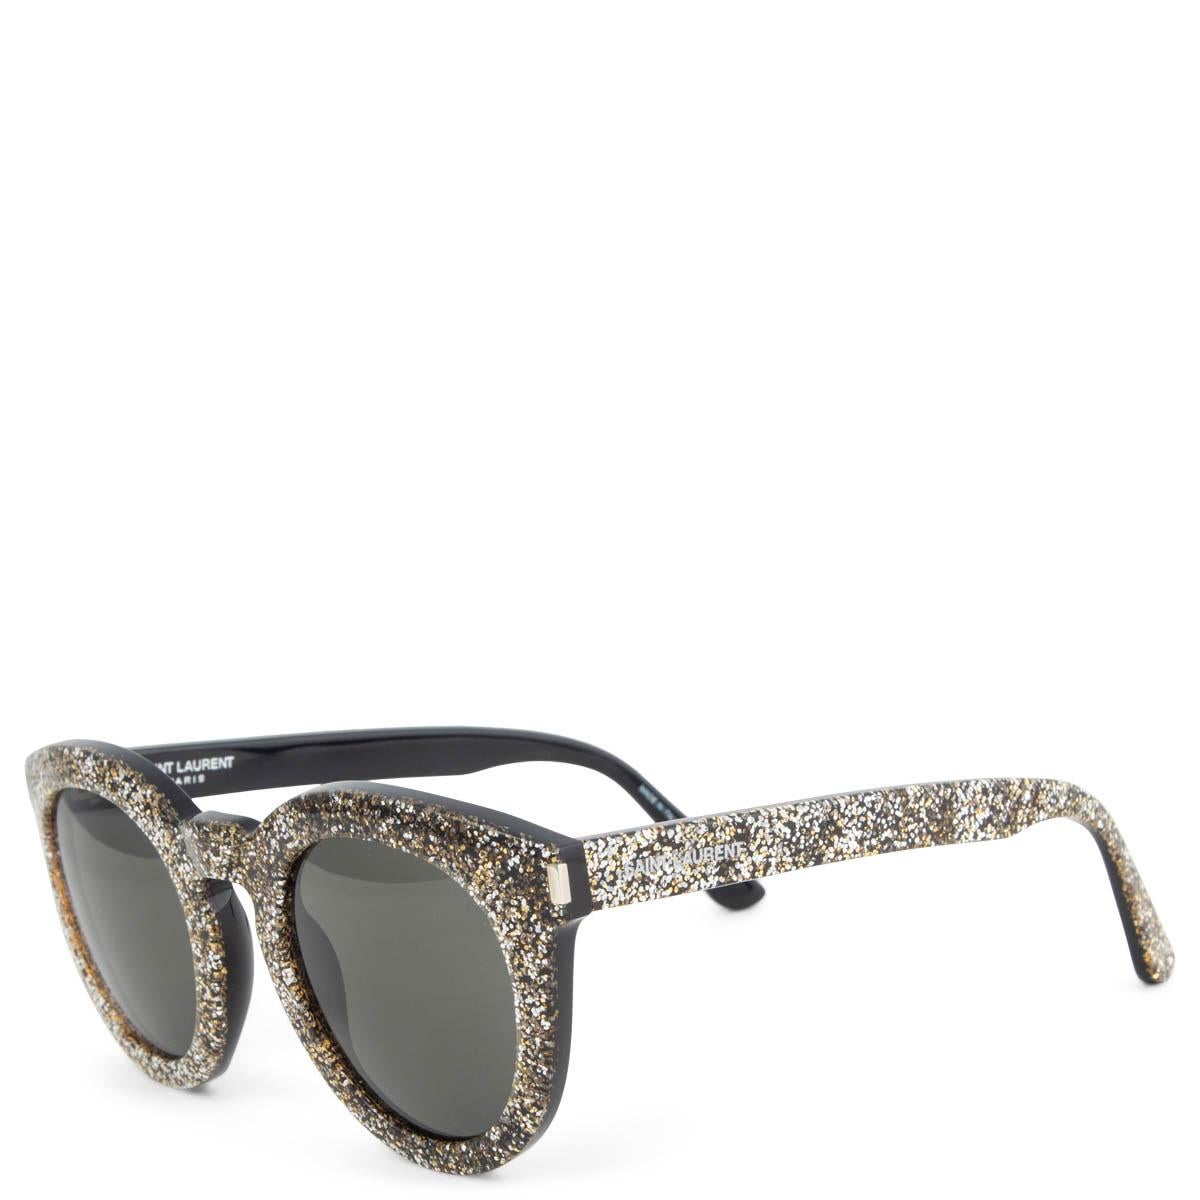 100% authentic Saint Laurent SL102 003 silver & gold glitter sunglasses in acetate with grey lenses. Have been worn and are in excellent condition. Come with case. 

Measurements
Model	SL102 003
Width	13.5cm (5.3in)
Height	5.3cm (2.1in)

All our